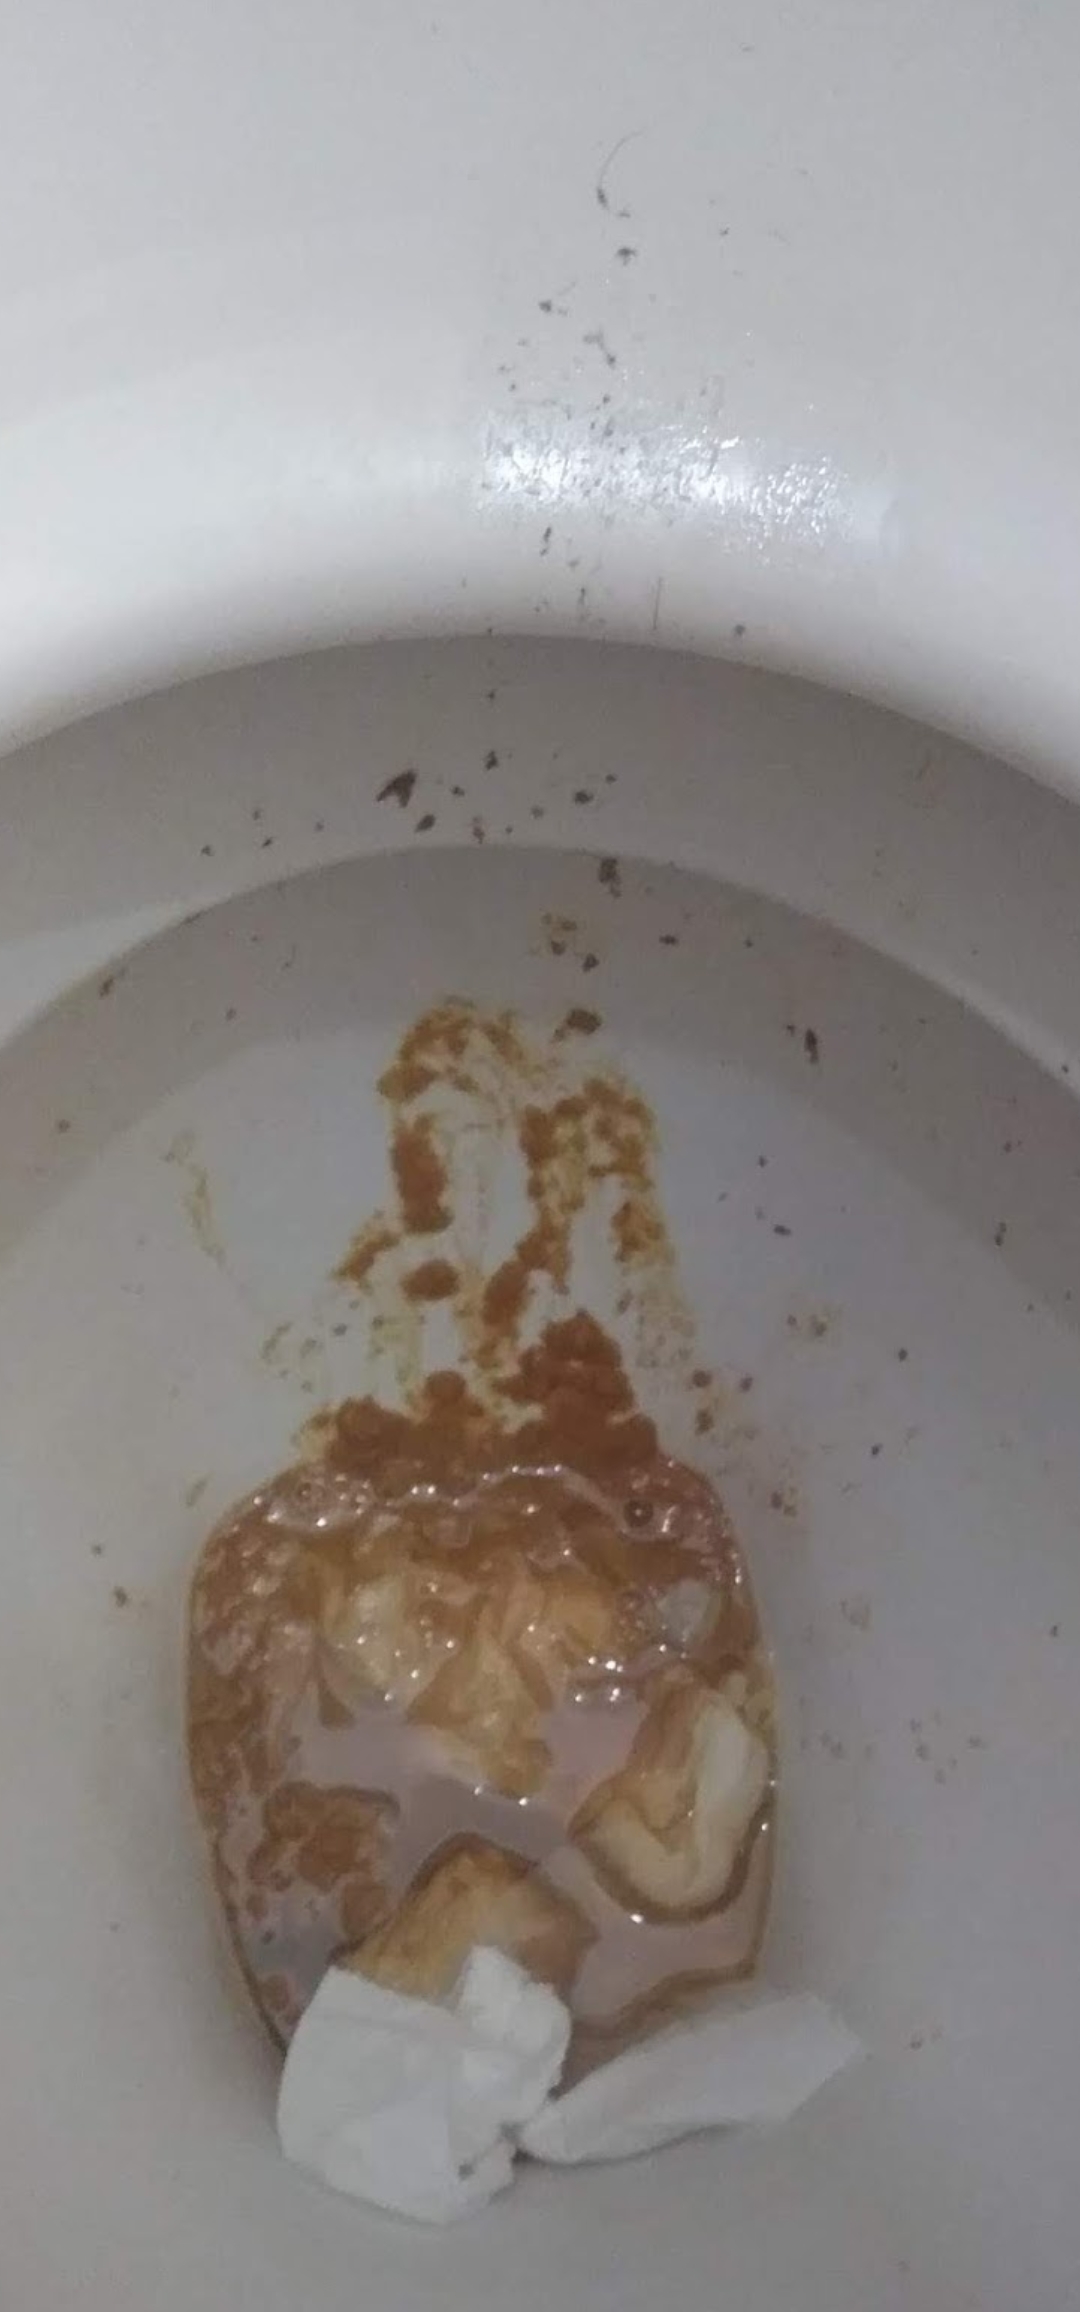 Having another loose farty shit on my mates loo before work